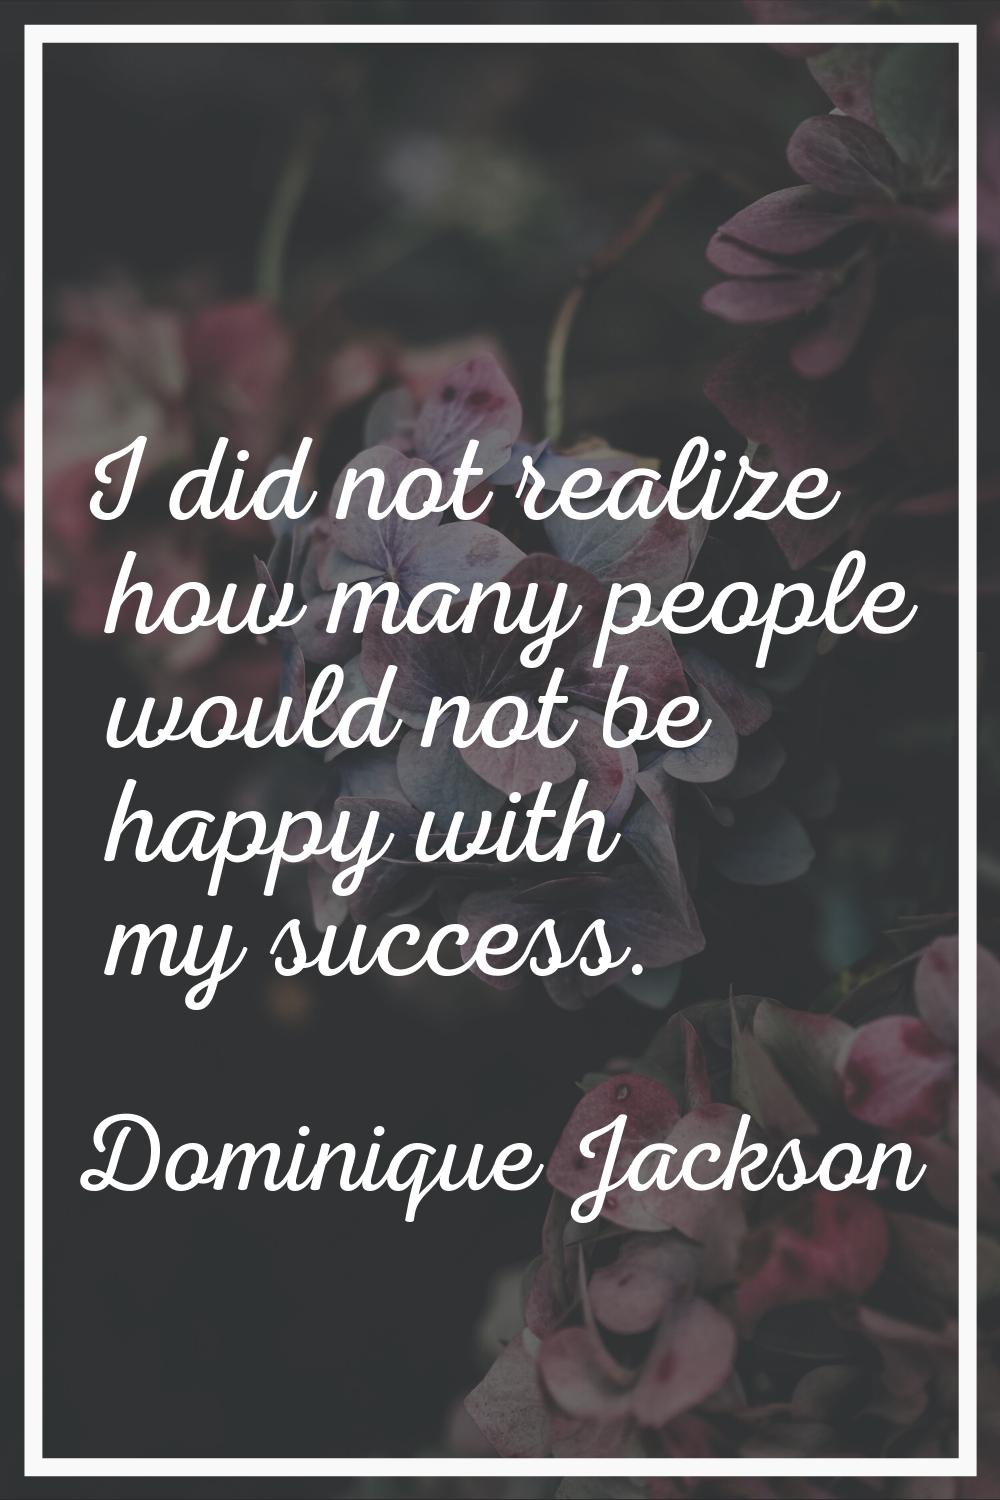 I did not realize how many people would not be happy with my success.